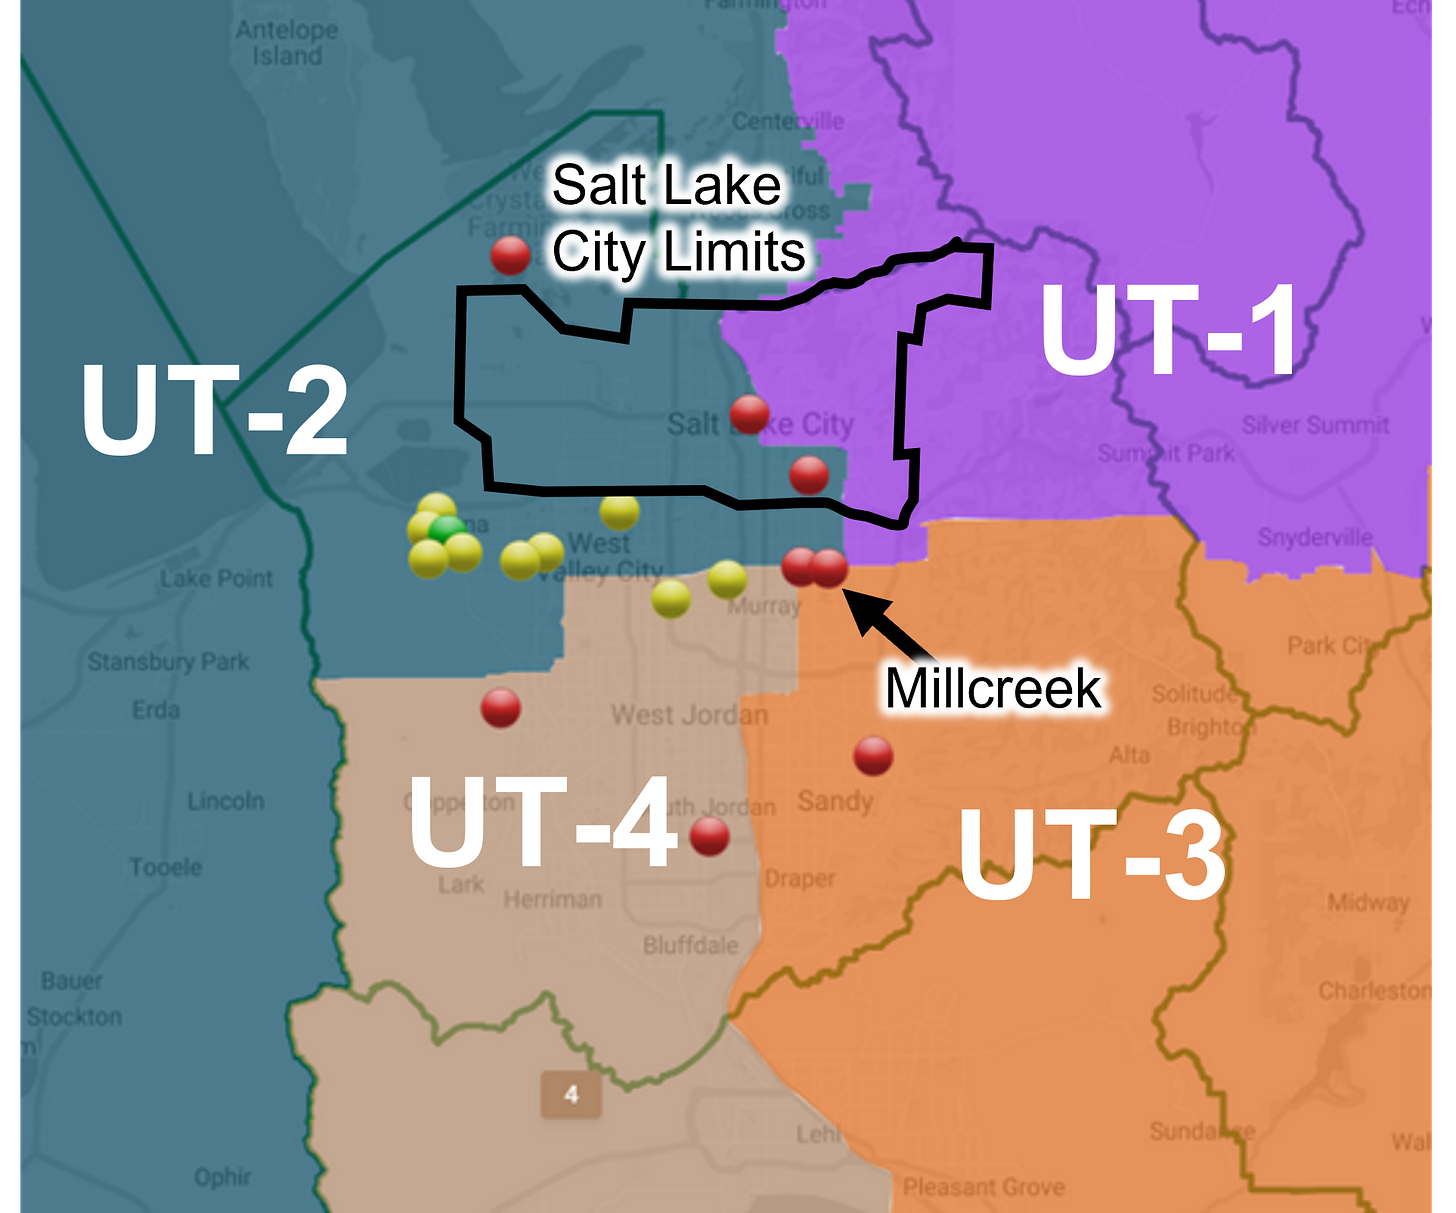 Utah's Congressional Districts' Intersection